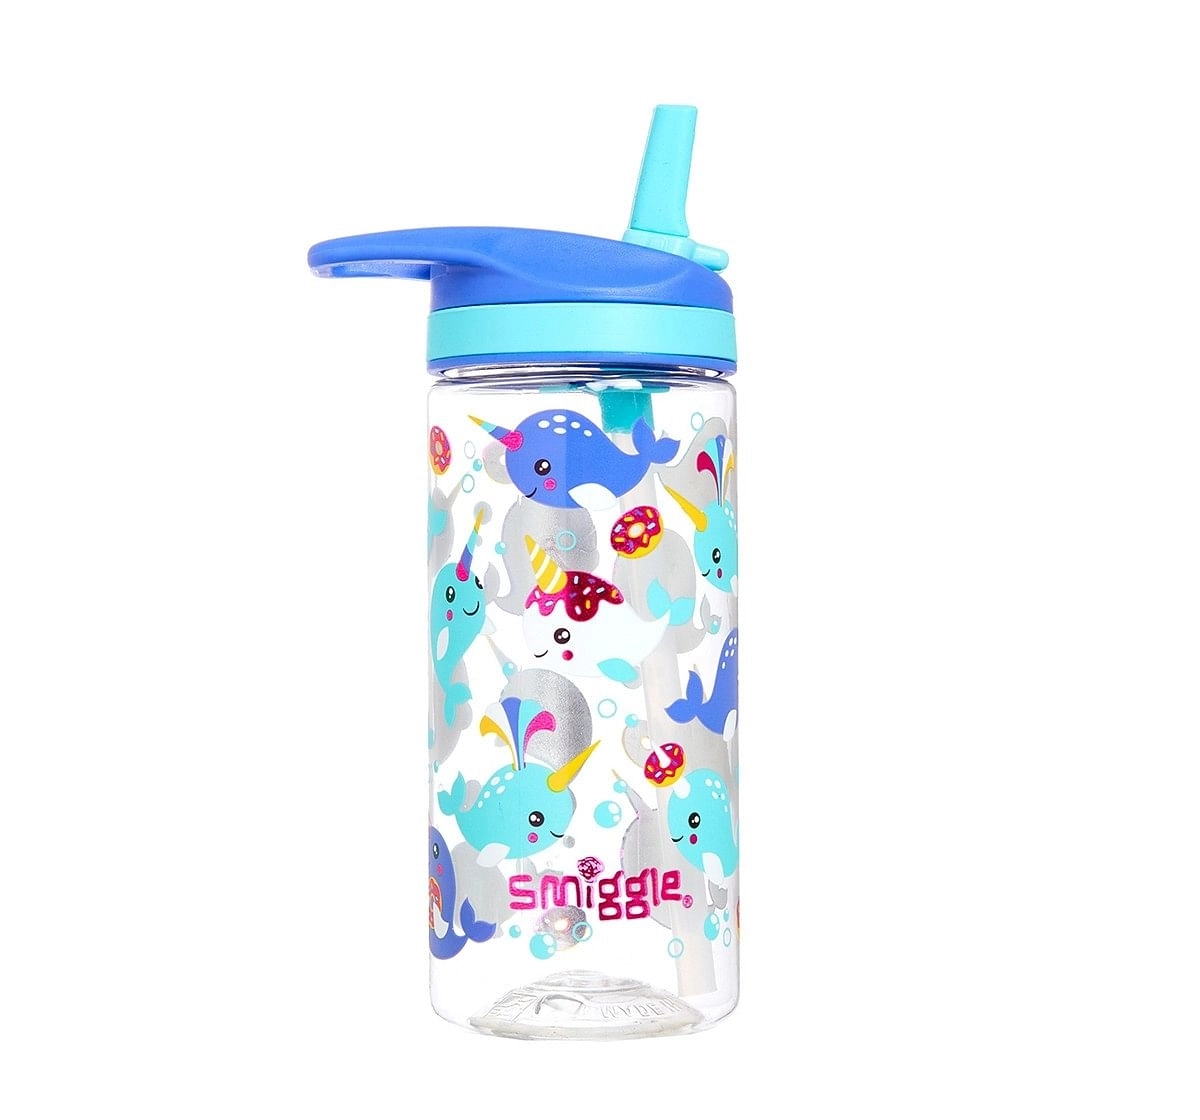 Smiggle Whirl Junior Bottle with Flip Top Spout - Narwhal print Bags for Kids age 3Y+ (Purple)